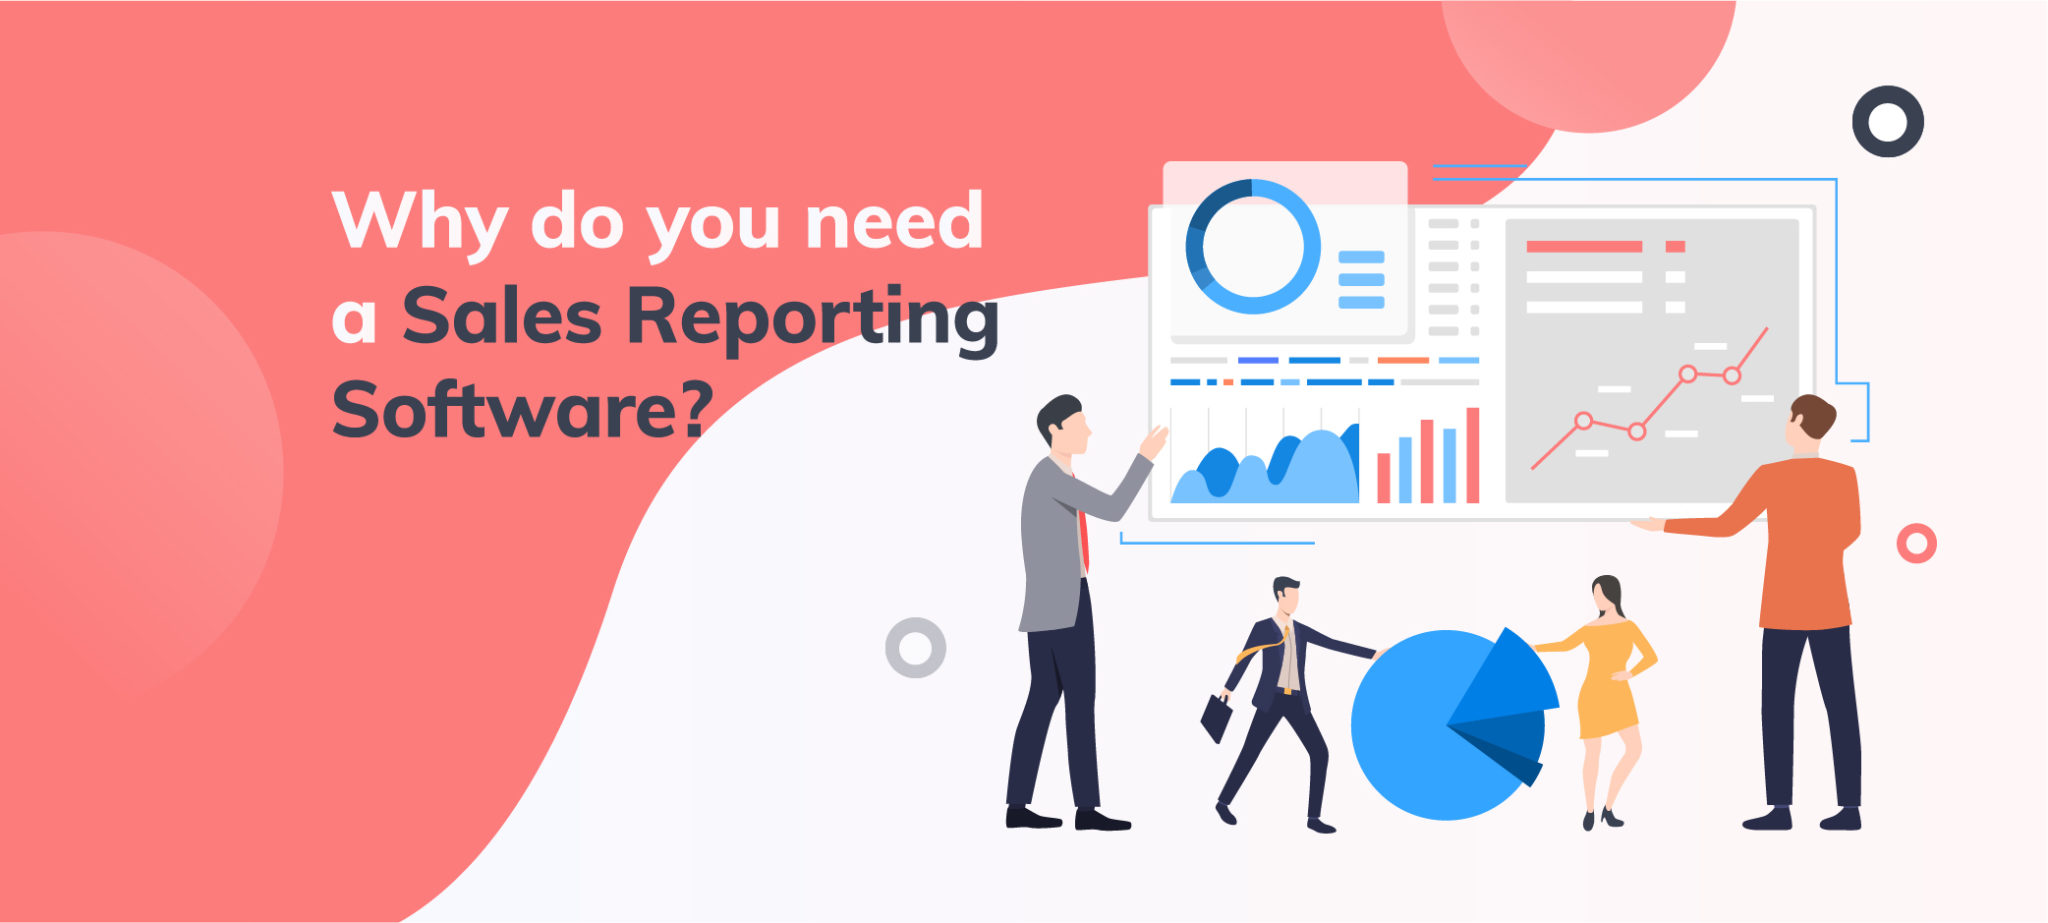 Sales reporting software - banner